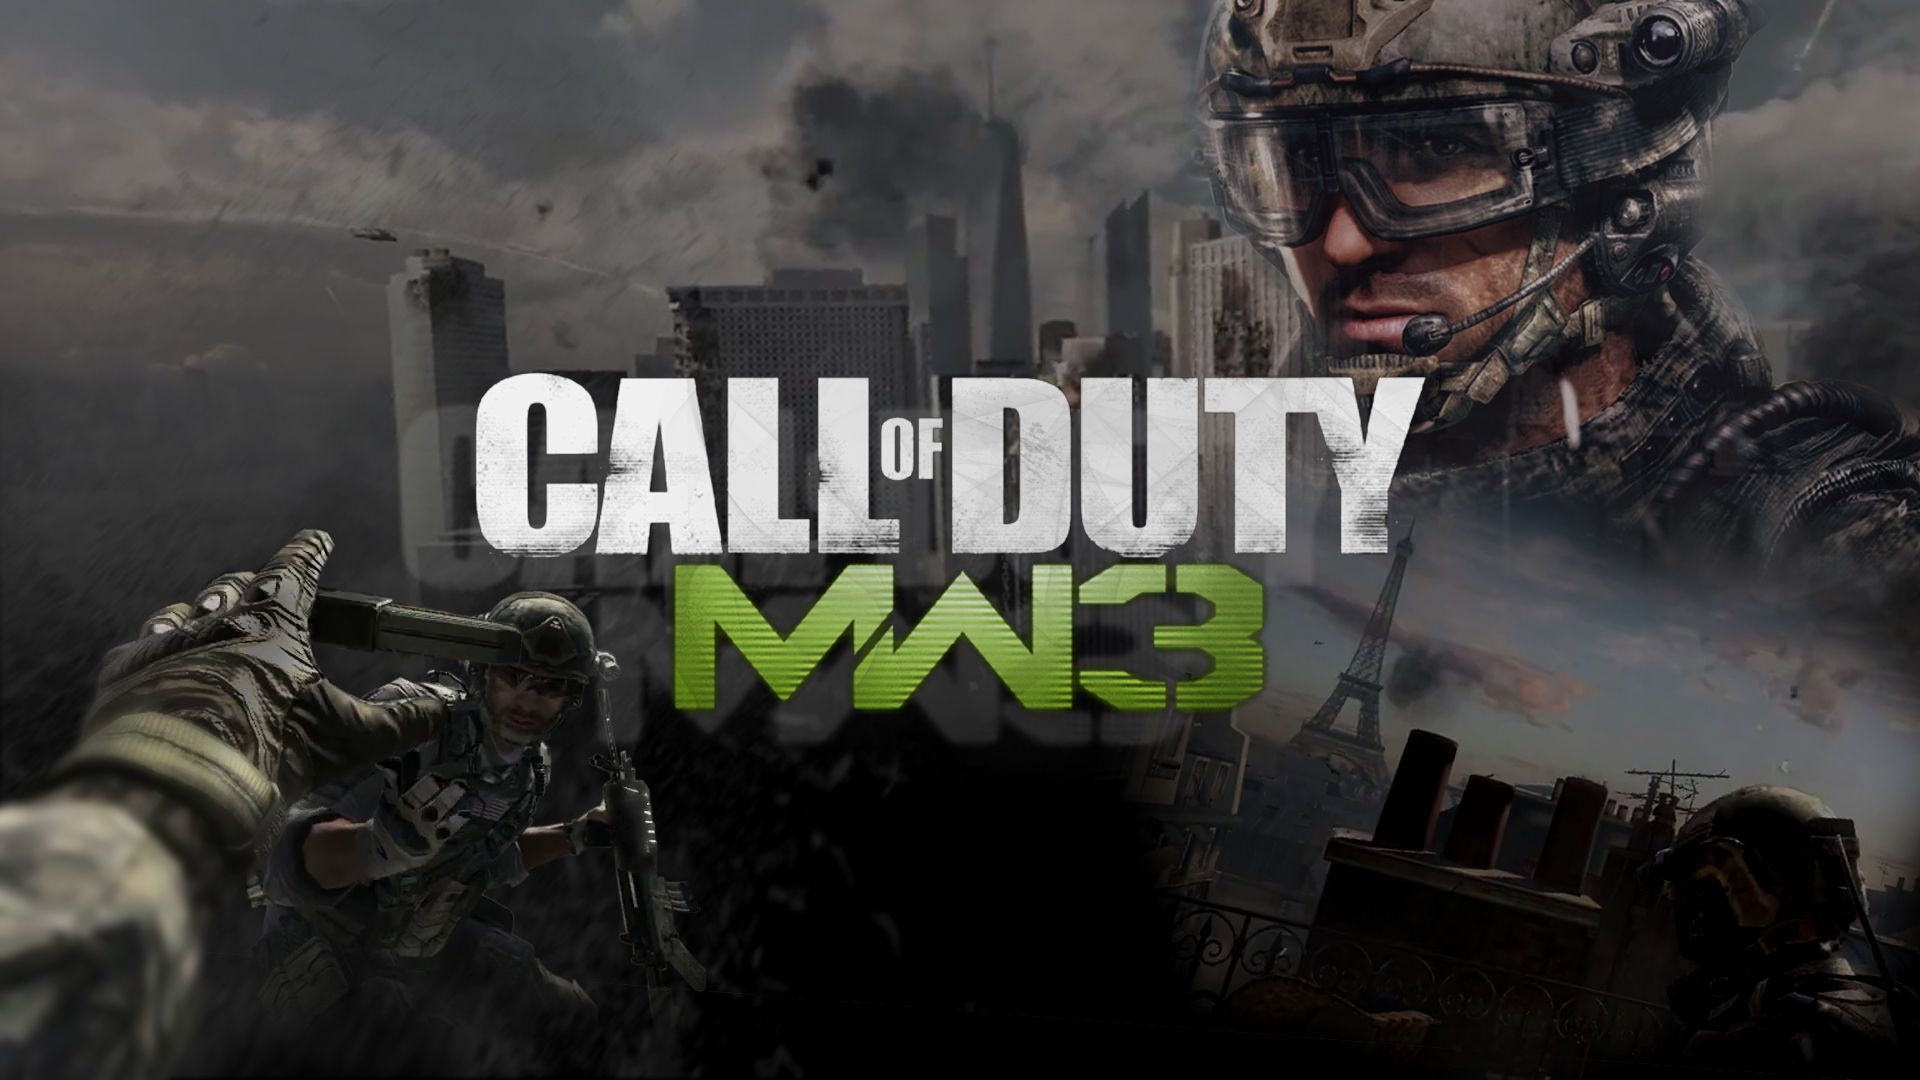 CoD MW2 PC requirements, Minimum & recommended specs for Call of Duty